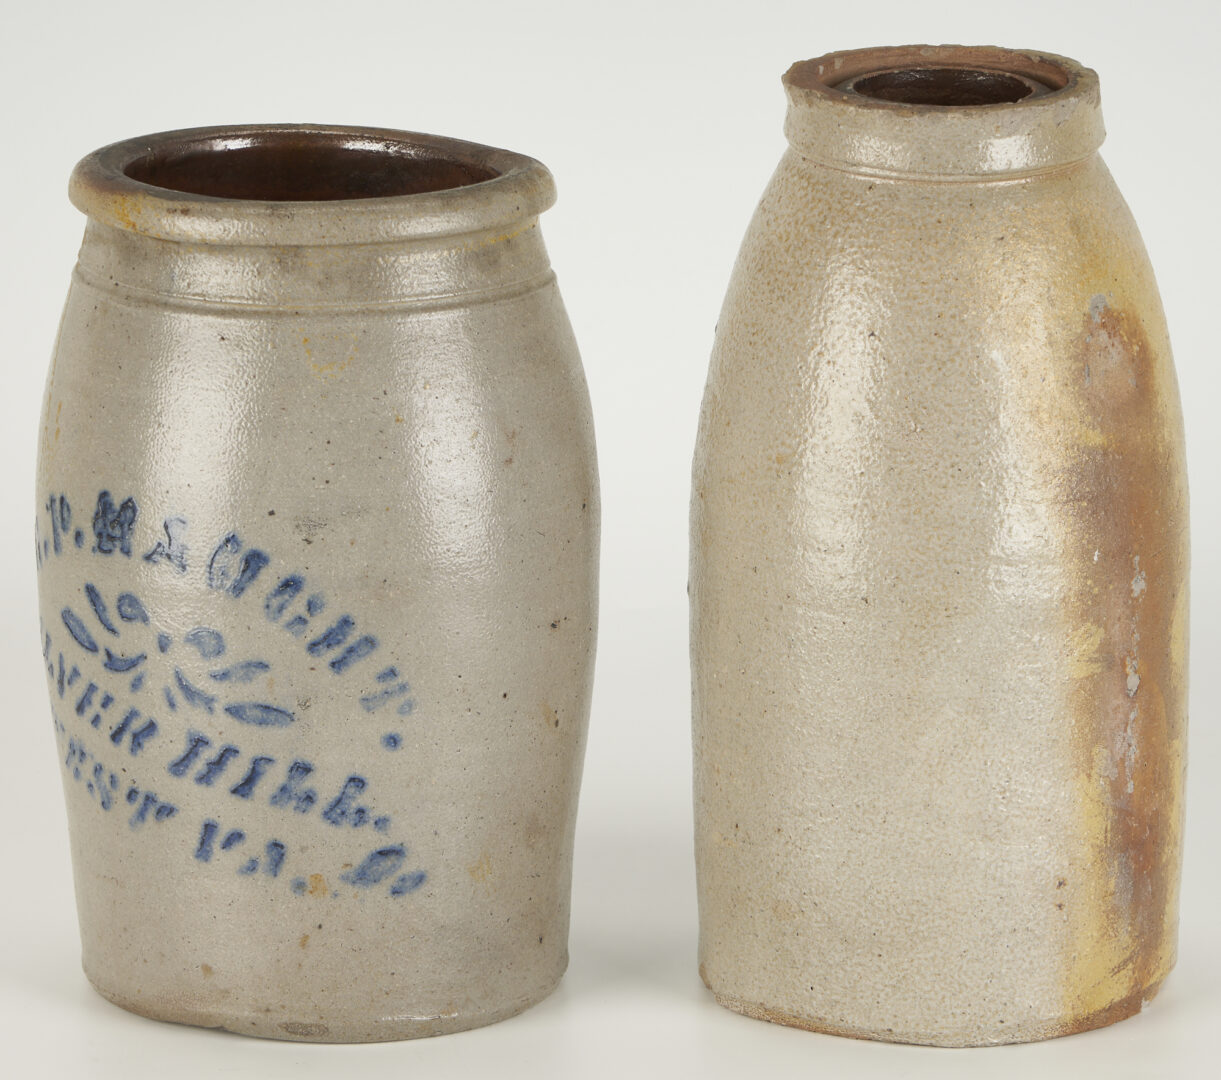 Lot 181: 2 Southern Stoneware Pottery Jars, incl. Haught – Silver Hill, West Virginia, Tally Jar